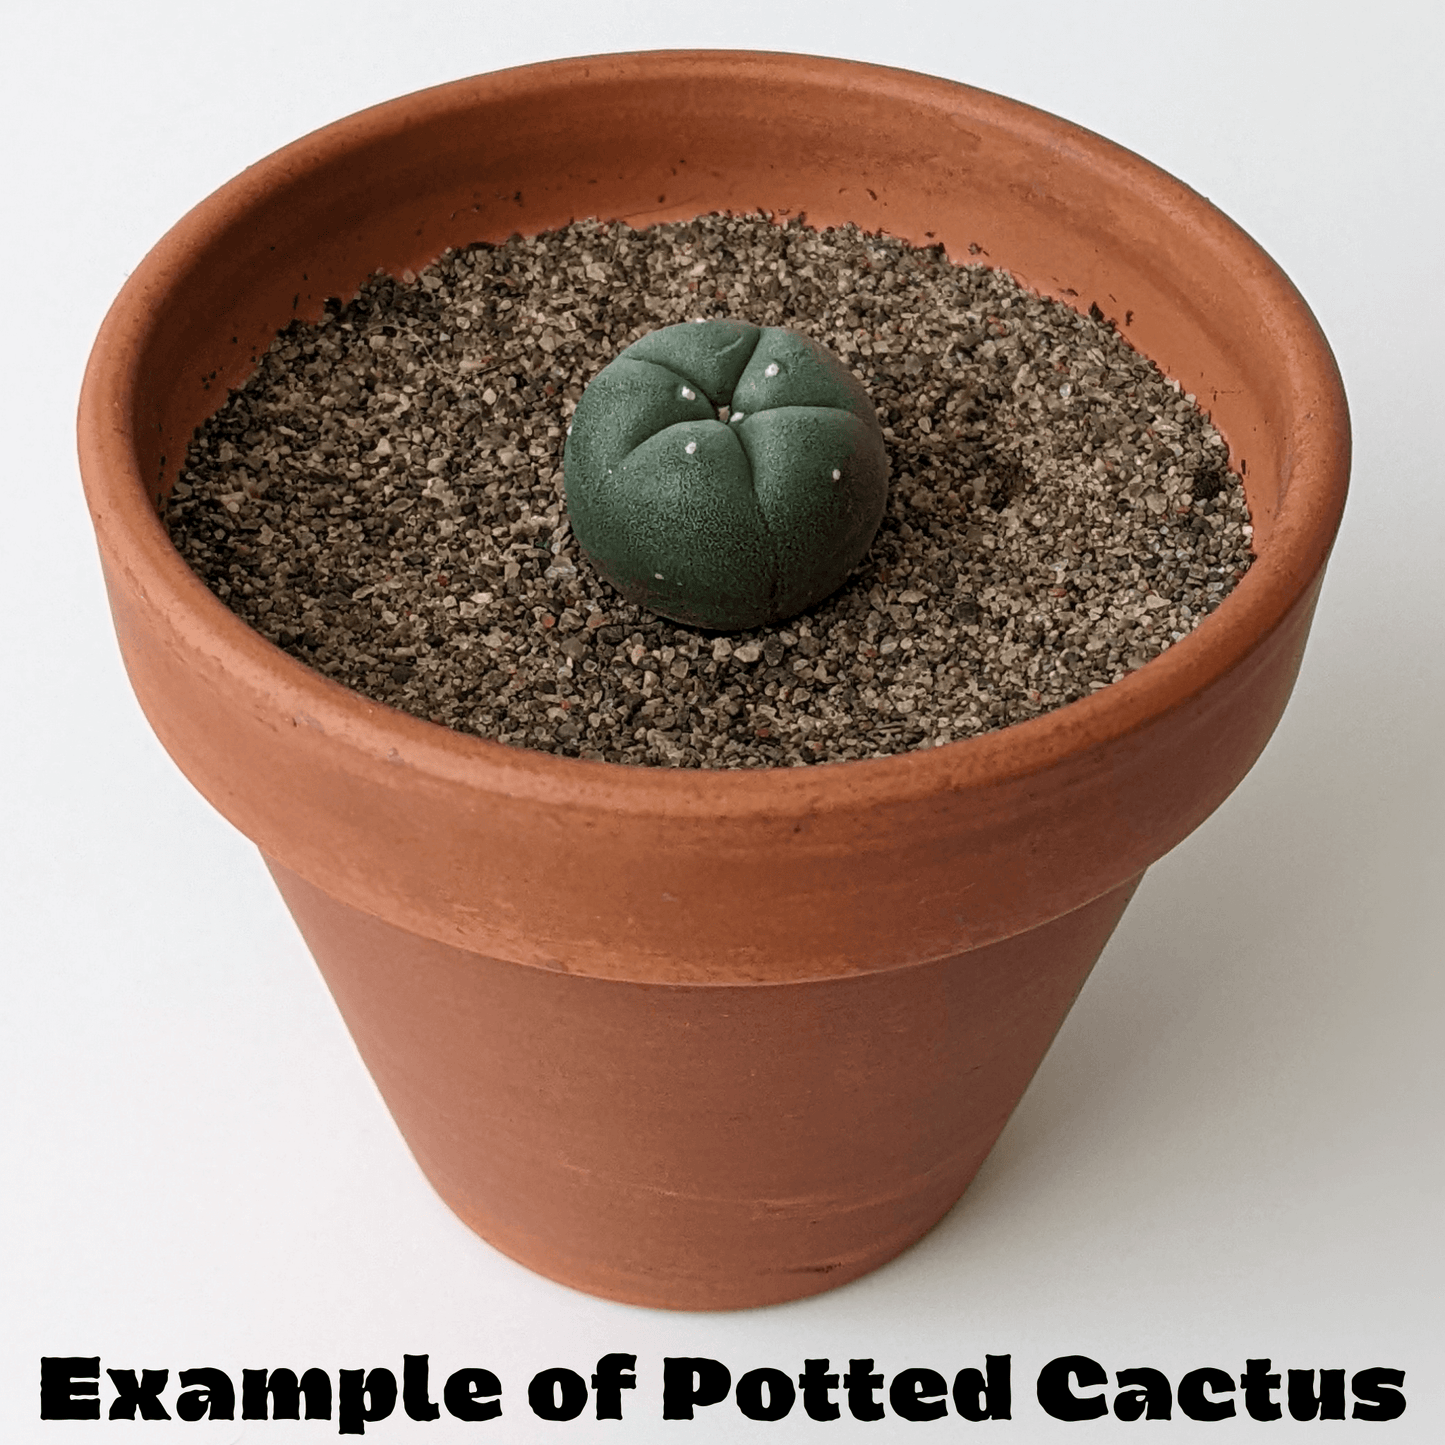 A peyote cactus growing in a clay pot.